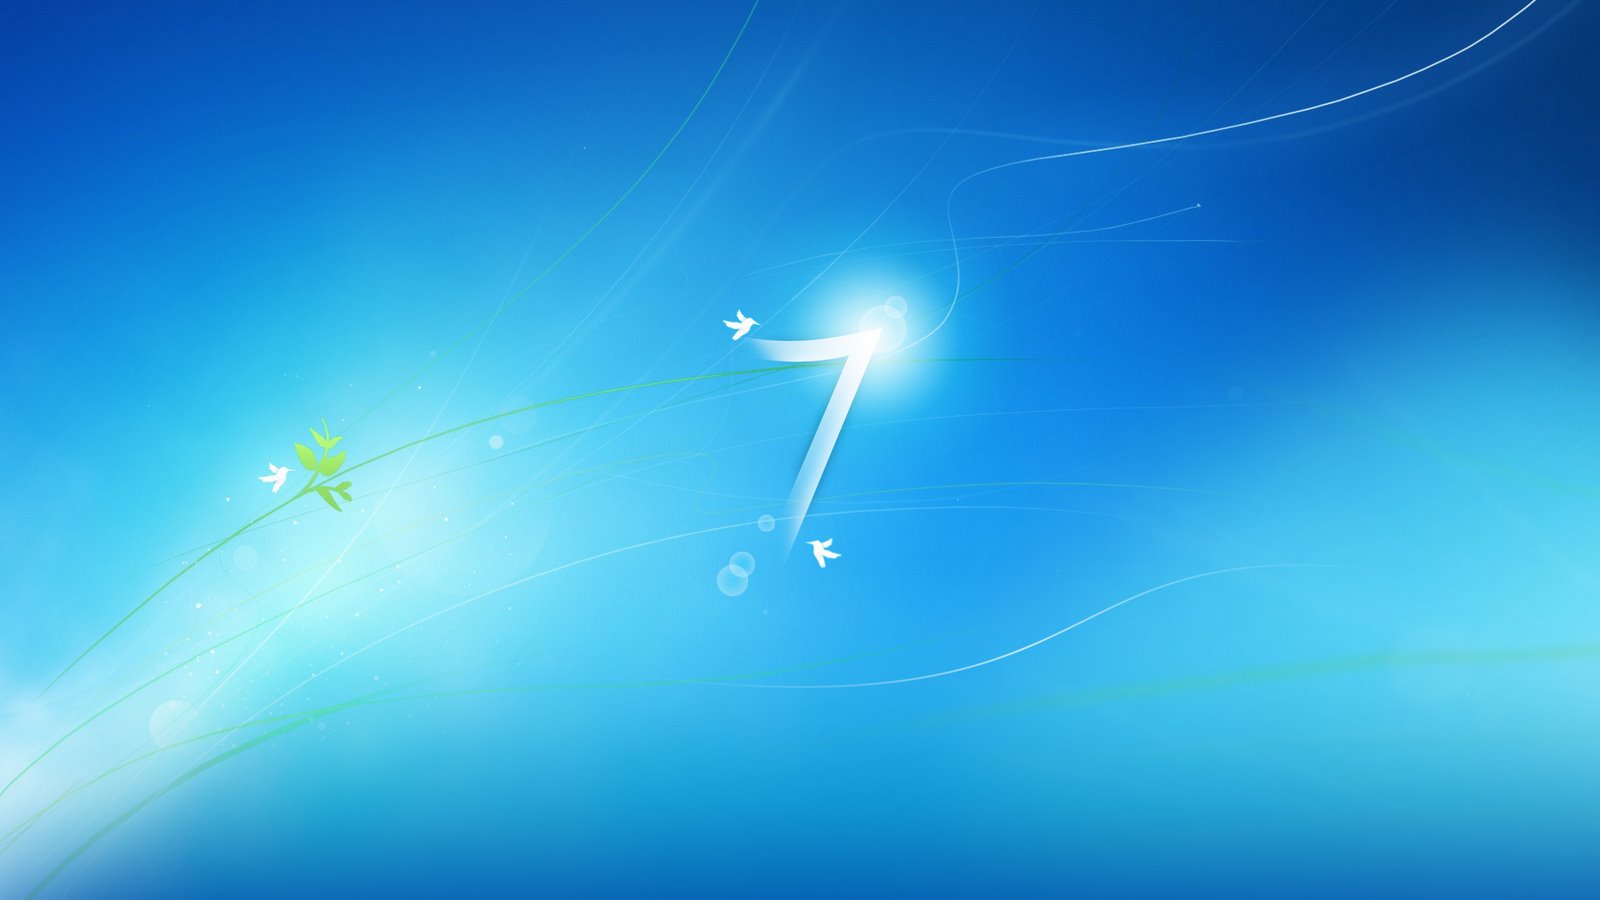 Windows 7 Abstract background.